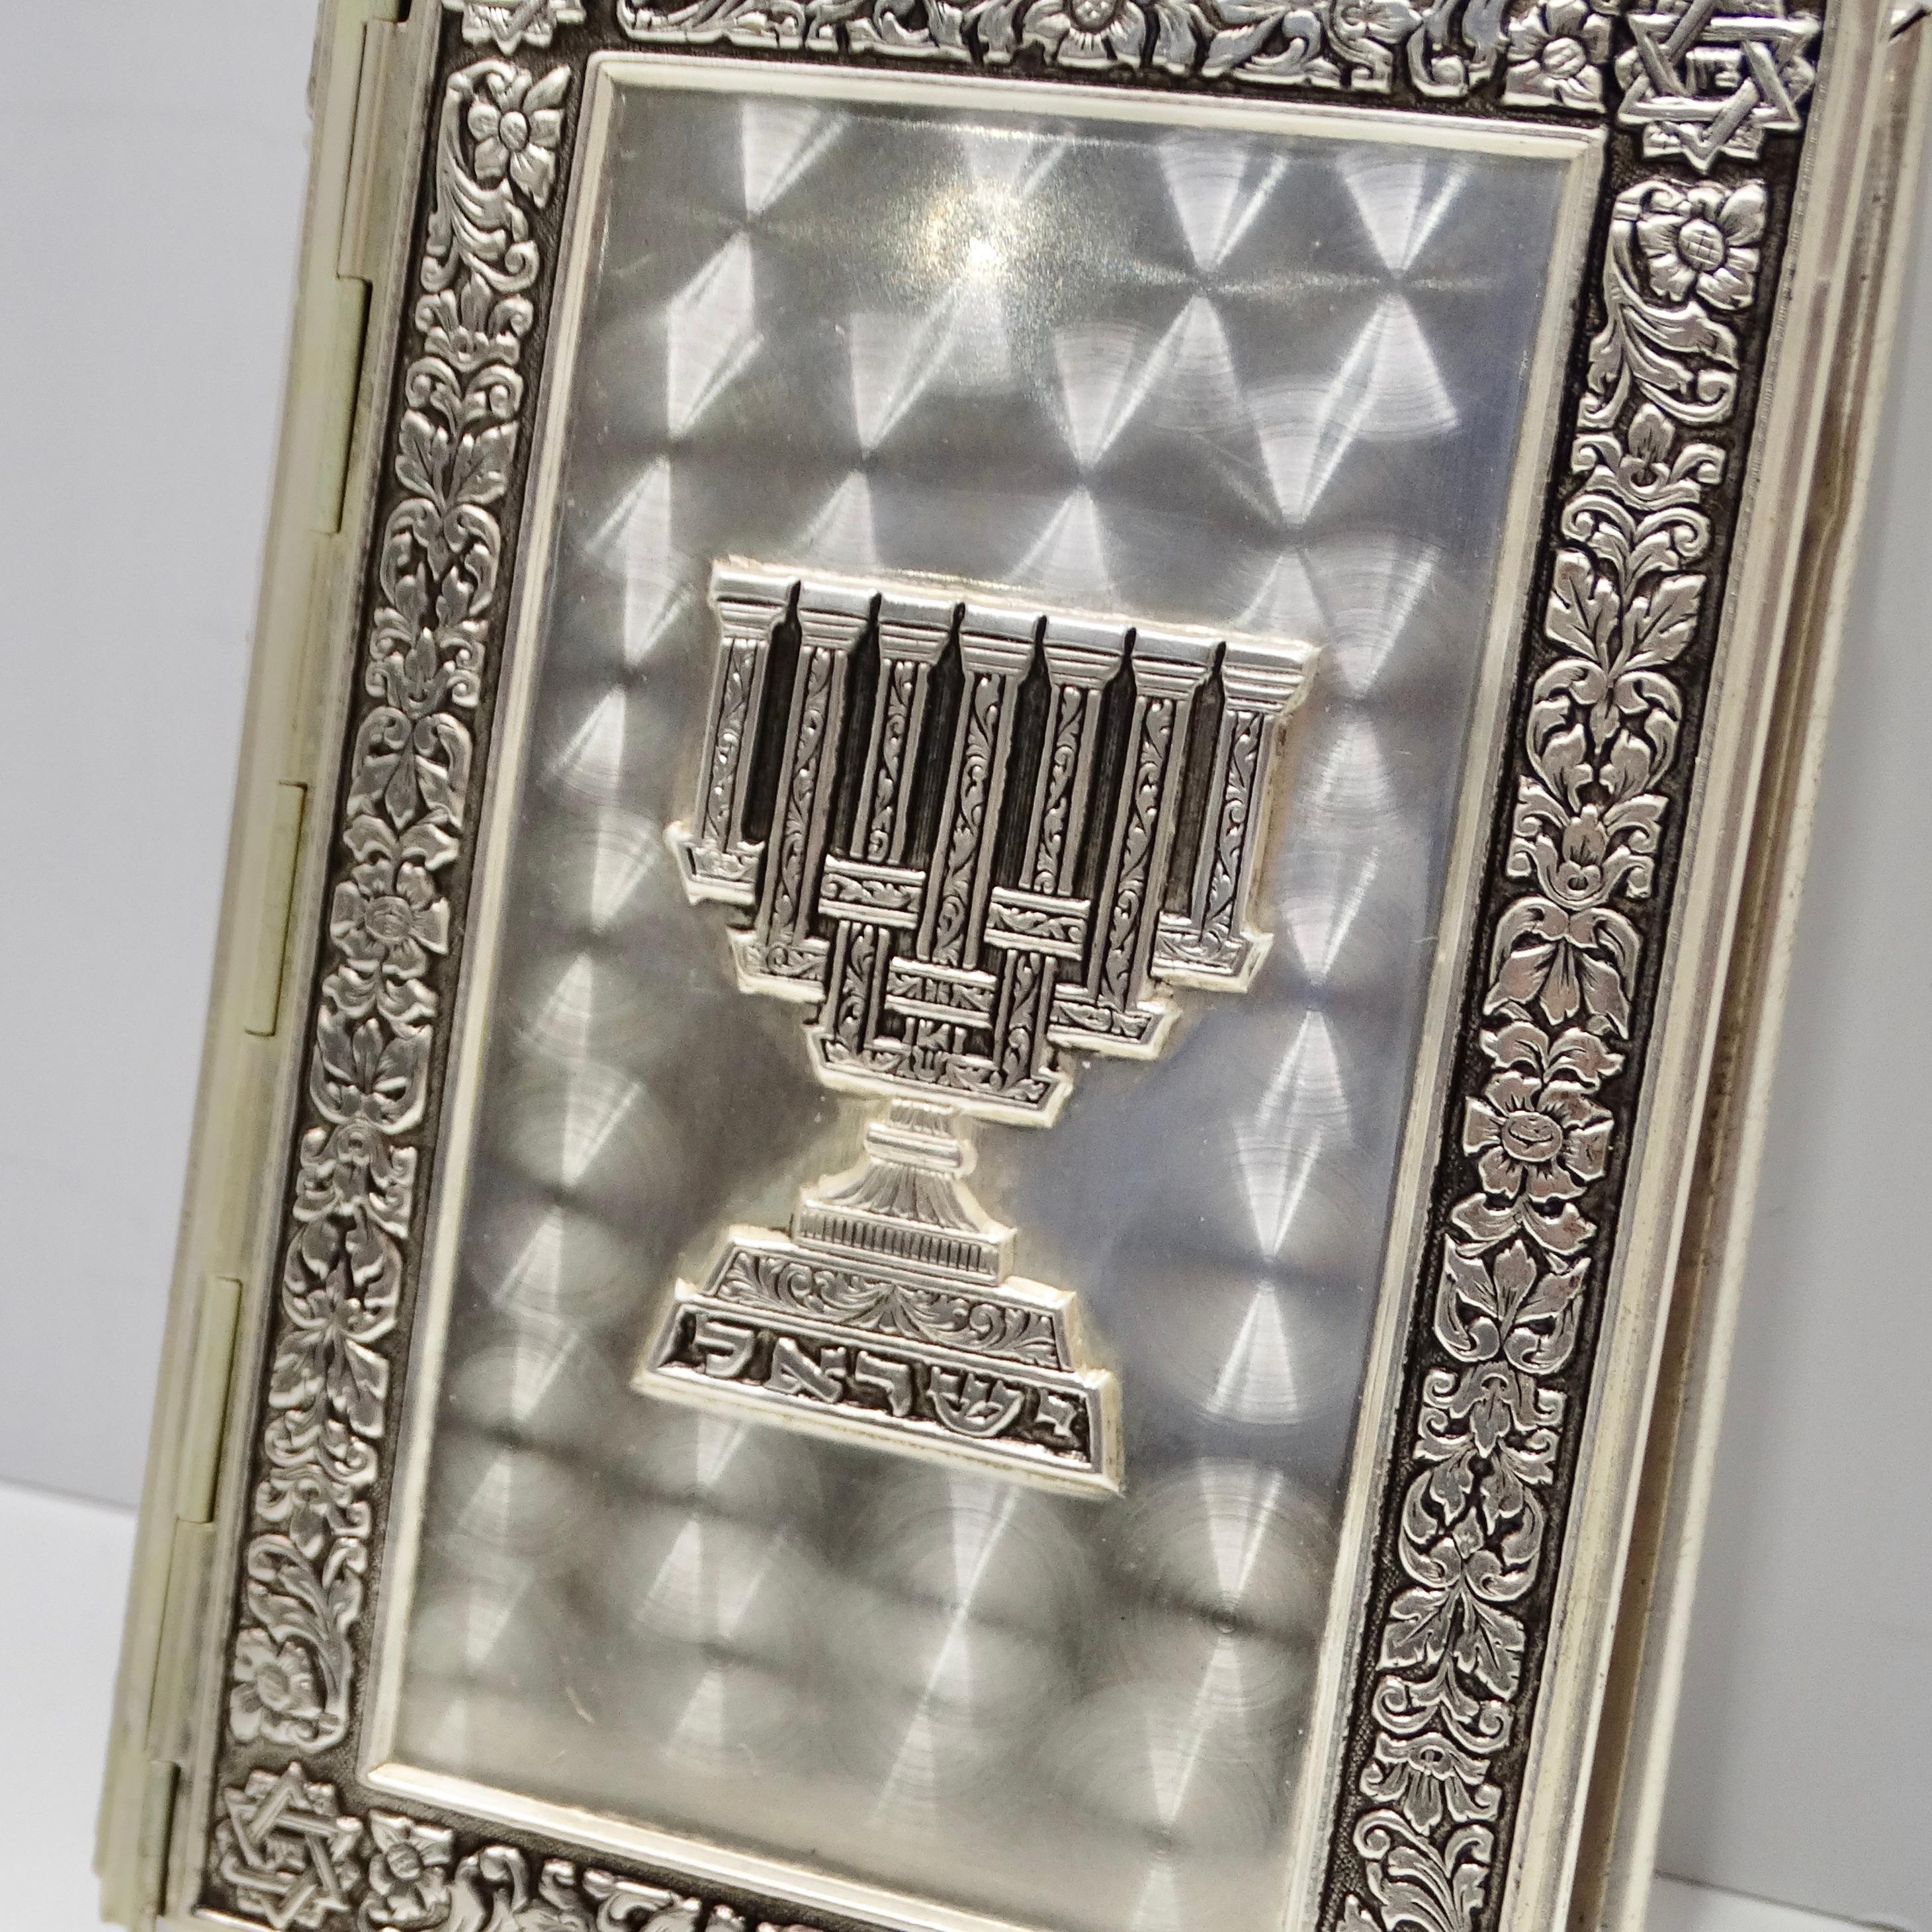 1964 Gem Encrusted Jewish Prayer Book In Good Condition For Sale In Scottsdale, AZ